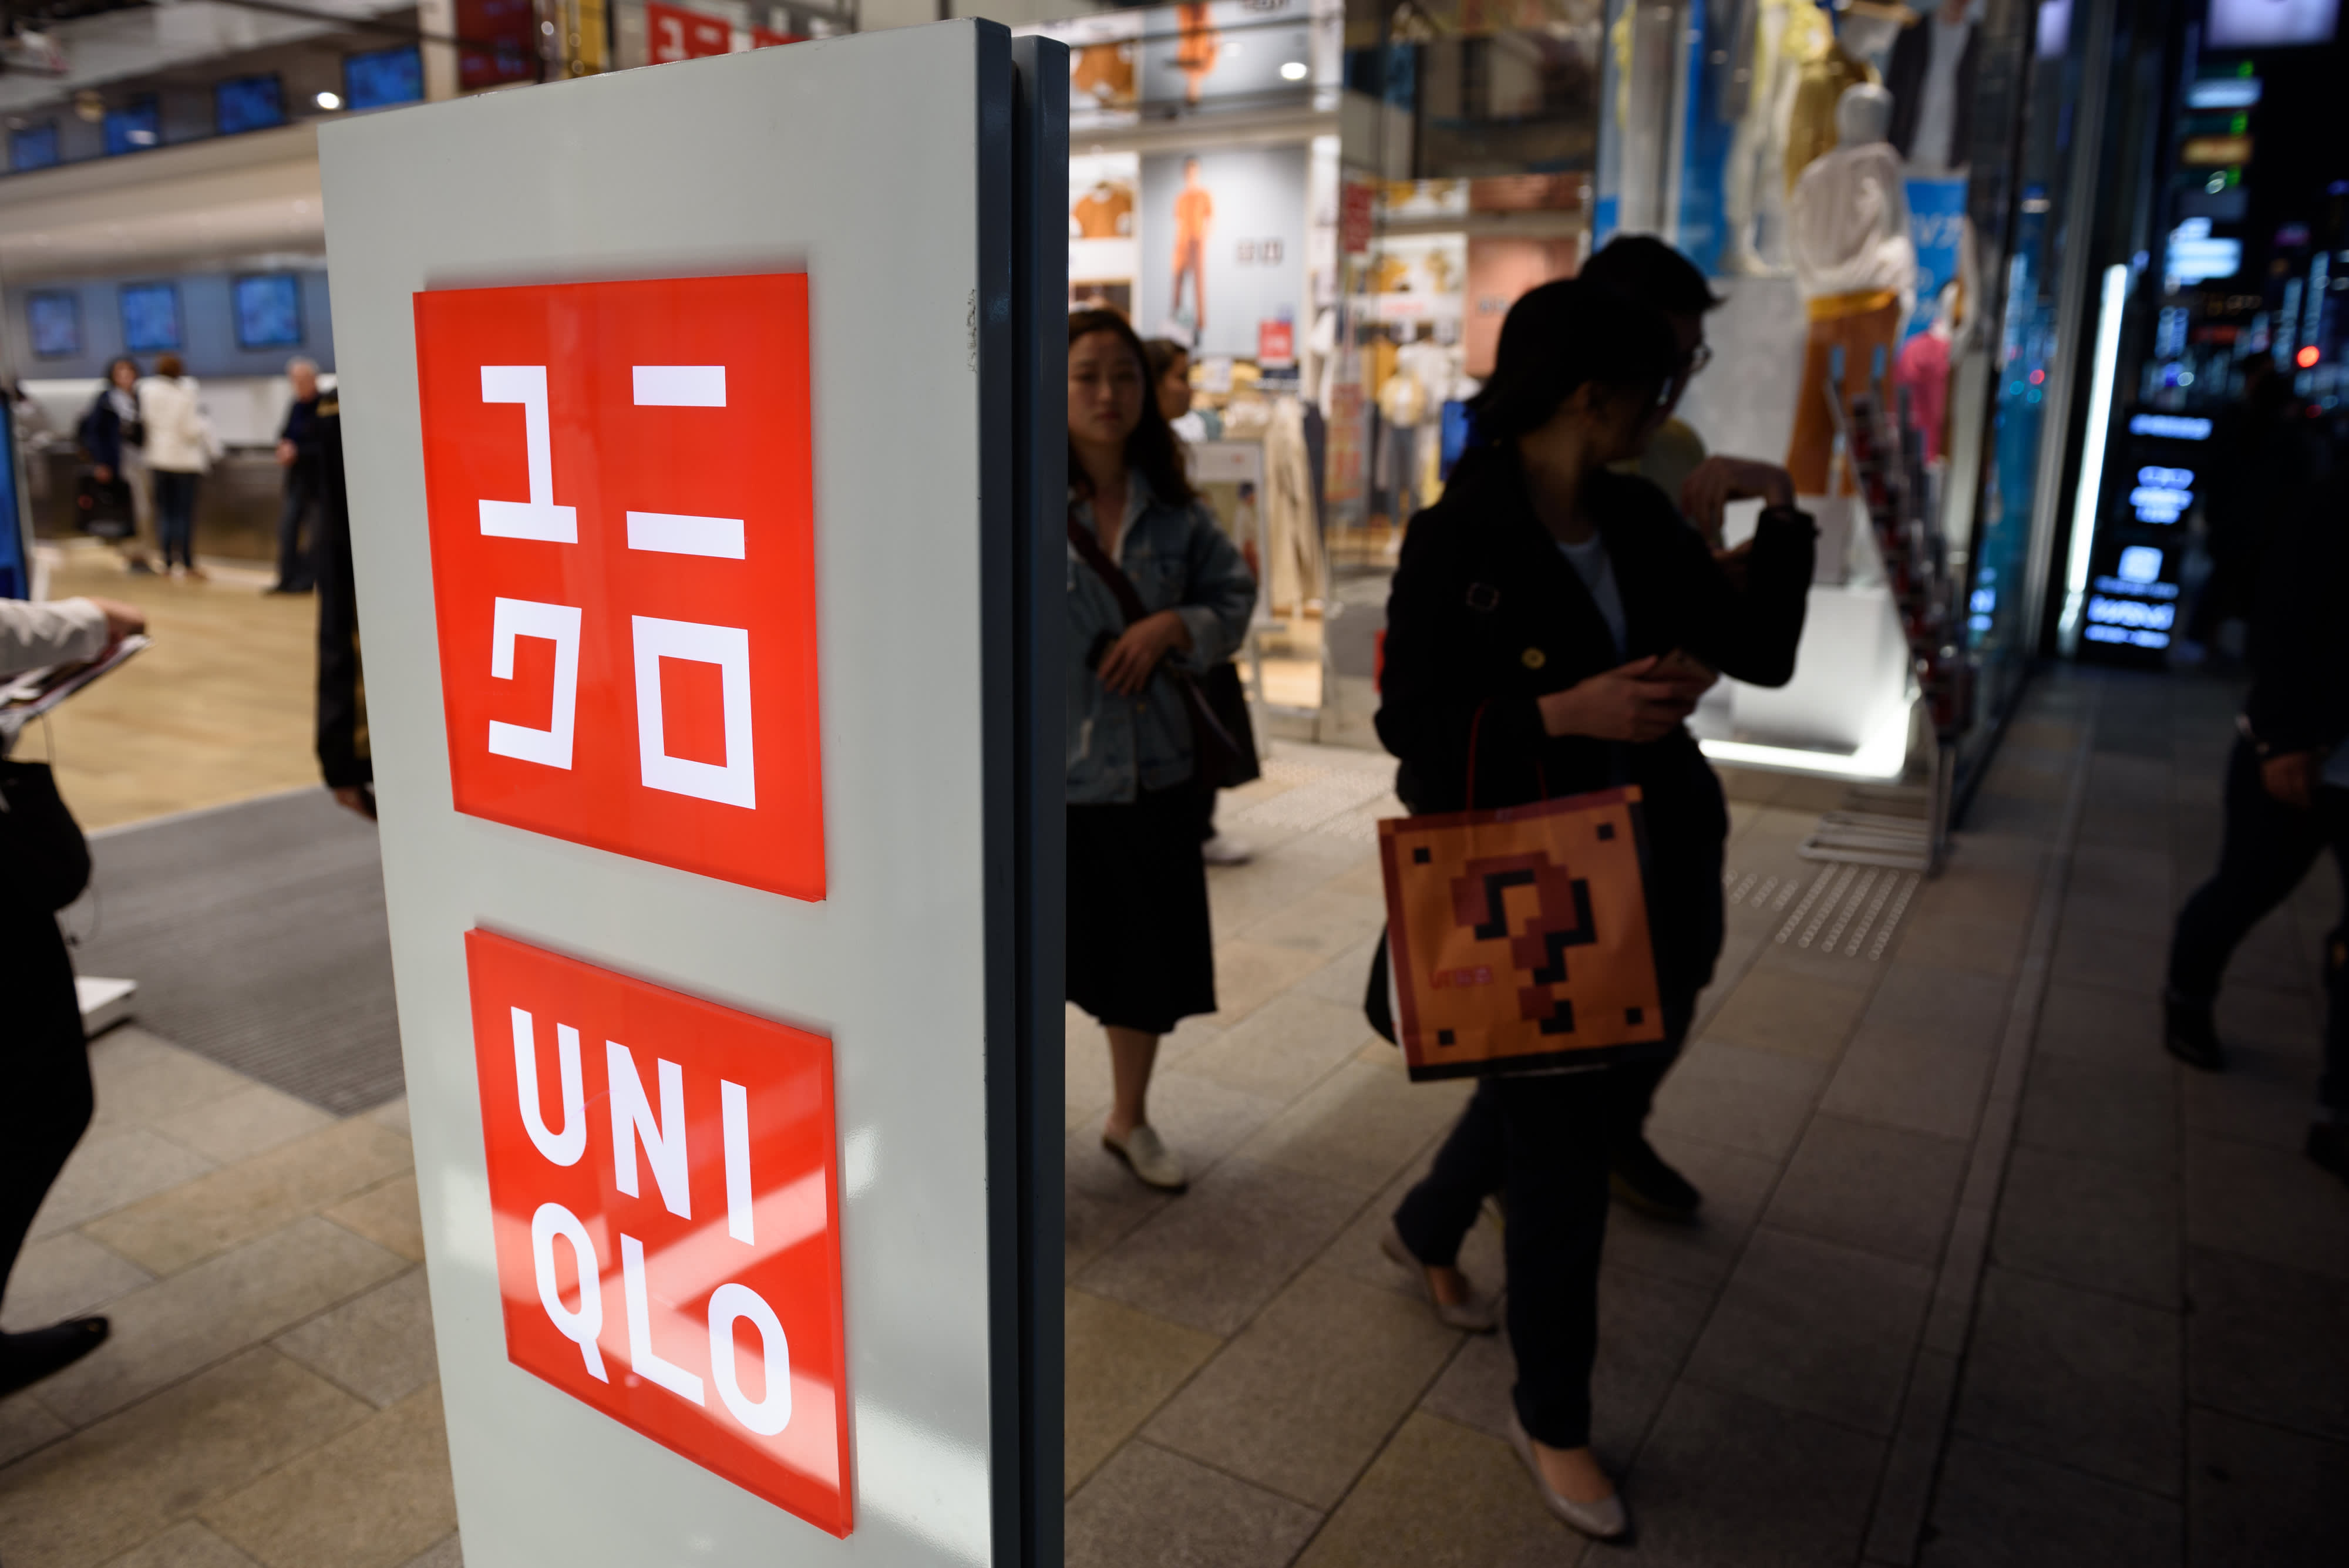 Uniqlo-owner Fast Retailing keeps posting record profits, but one analyst warns of uncertainty